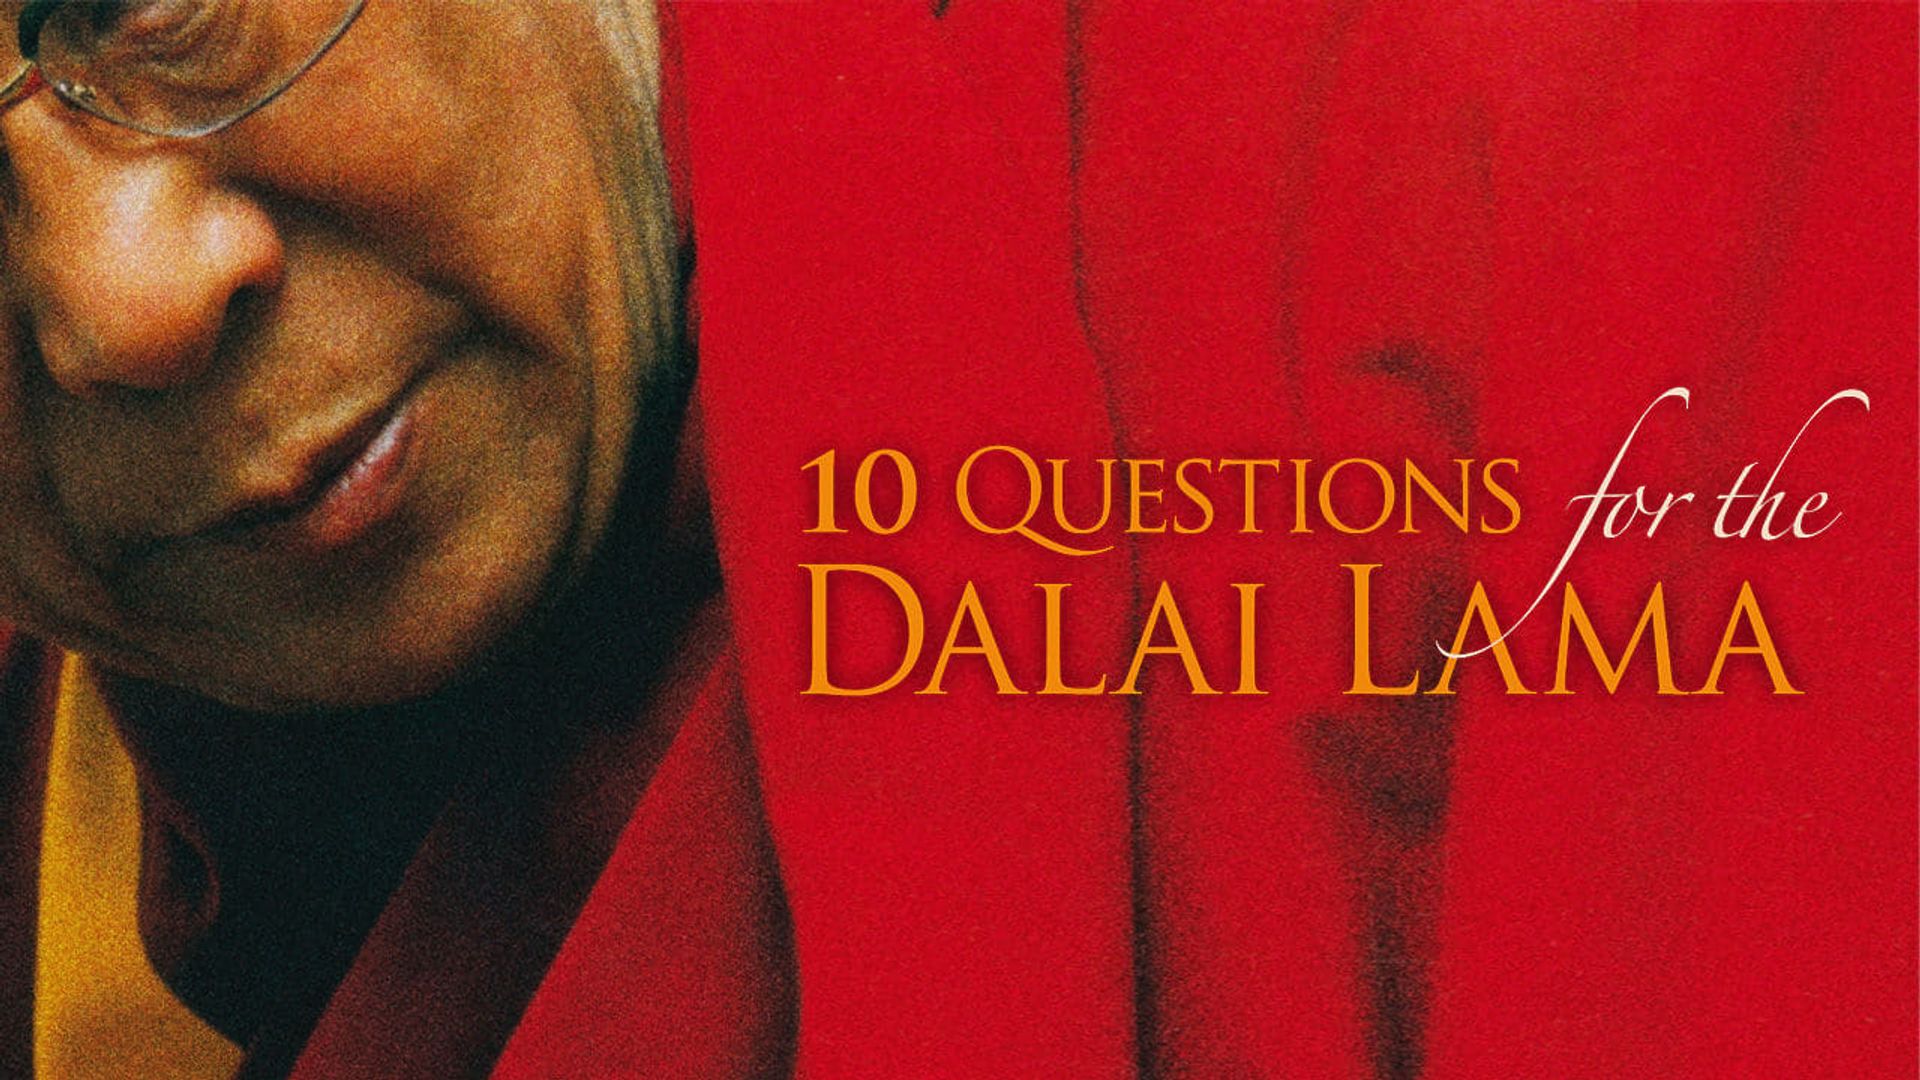 10 Questions for the Dalai Lama background